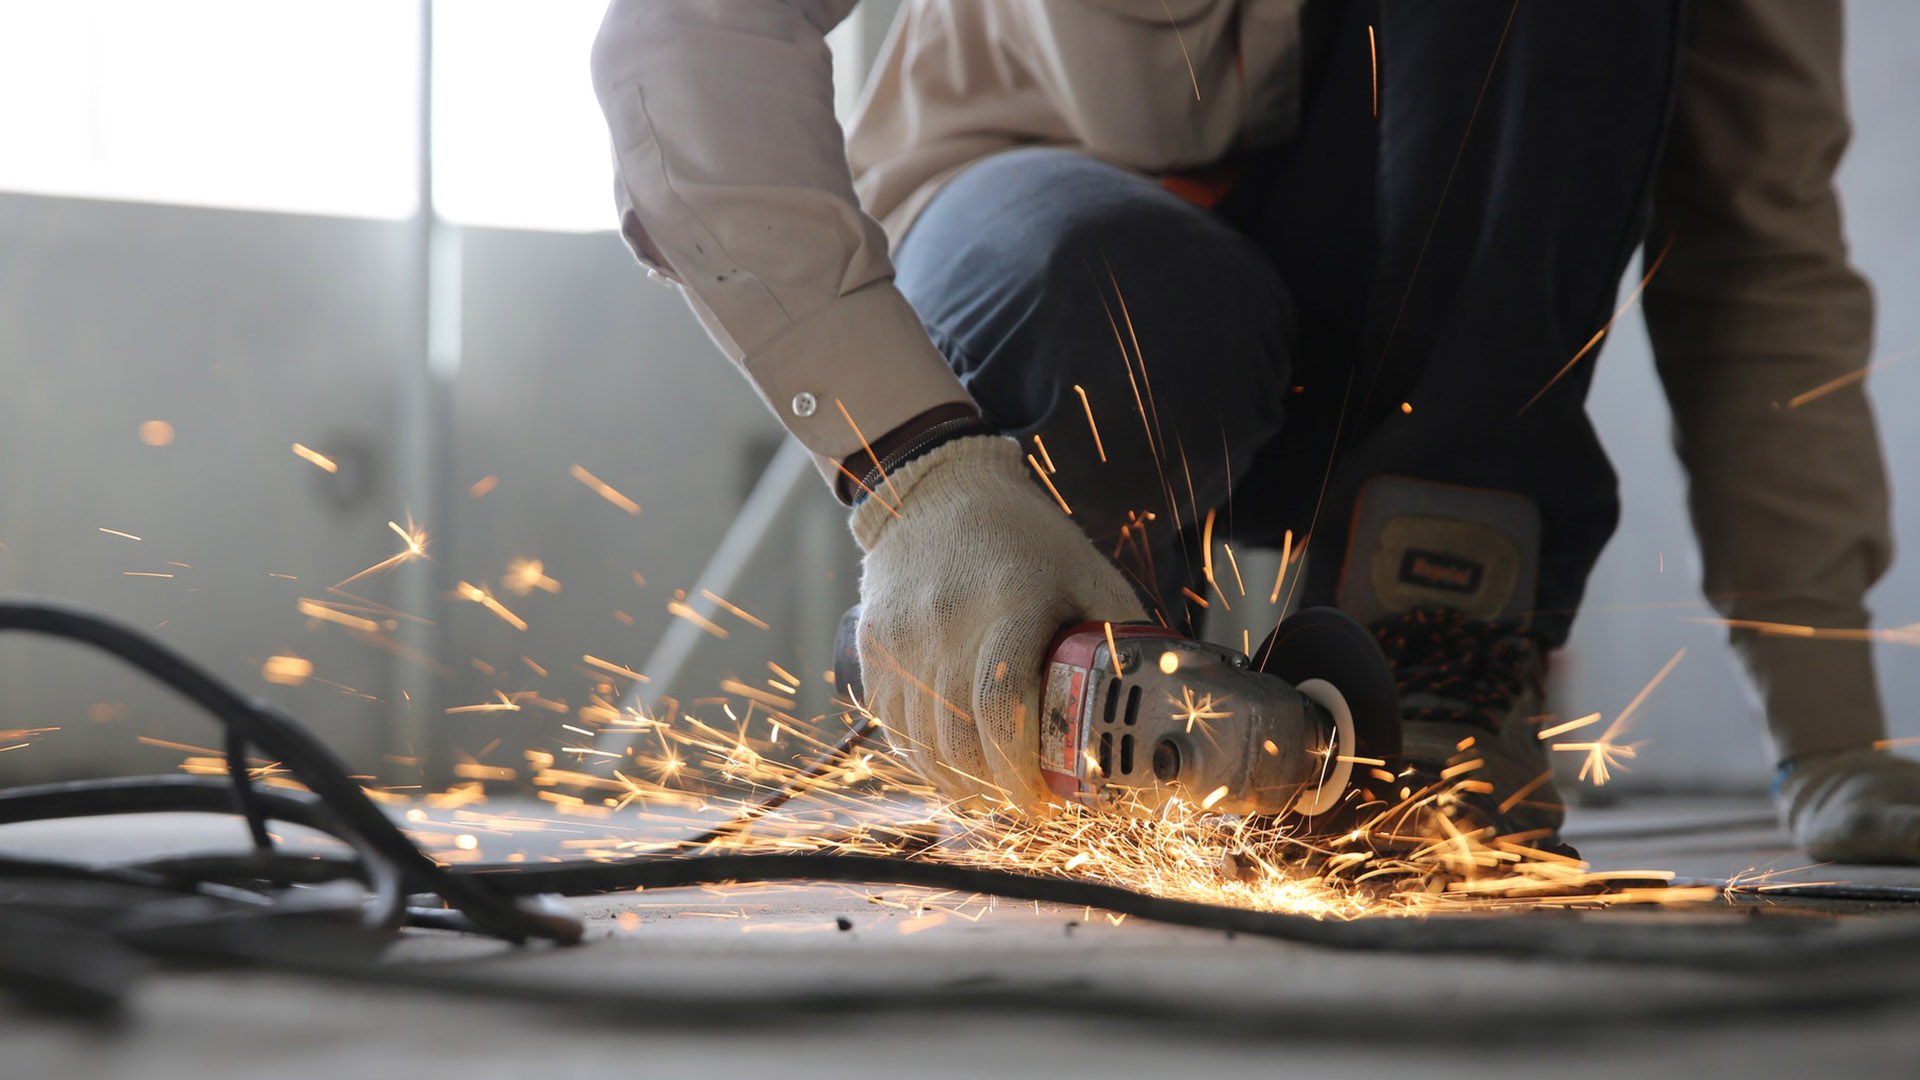 A tradesperson using a circular saw with sparks flying